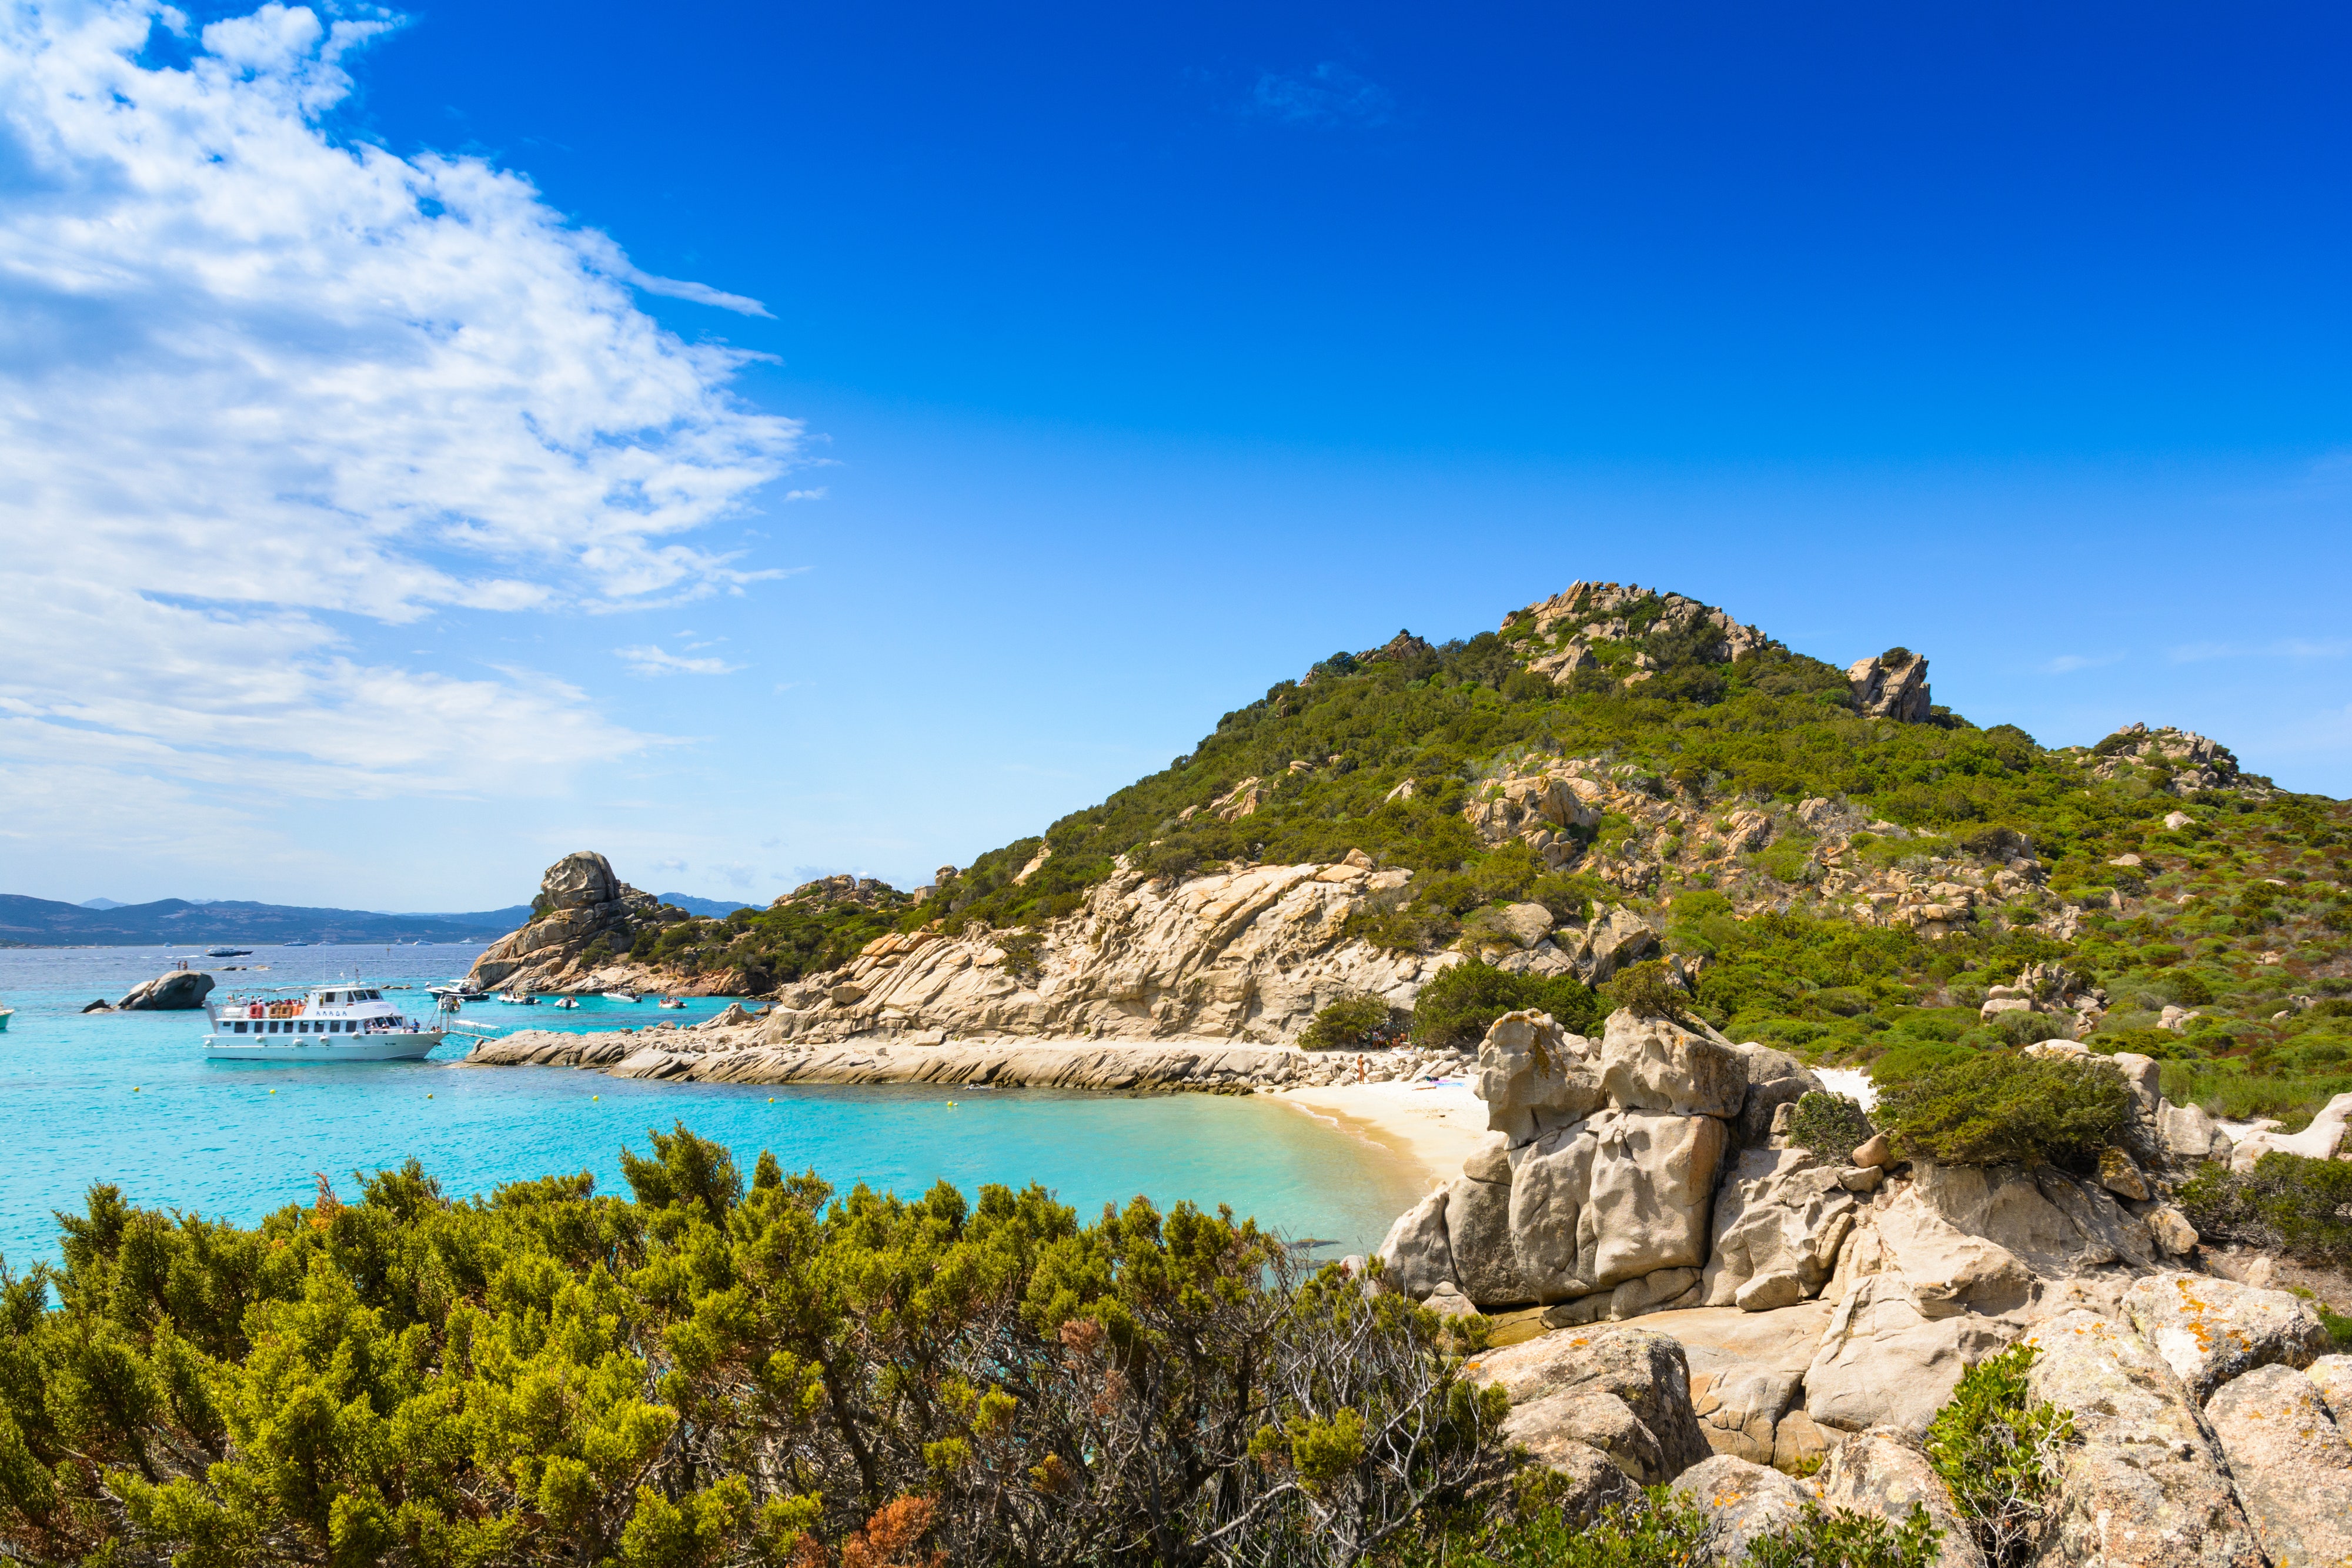 <p>Located in the Maddalena Archipelago between Sardinia and the <a href="https://www.cntraveler.com/destinations/france?mbid=synd_msn_rss&utm_source=msn&utm_medium=syndication">French</a> island of Corsica, Isola Spargi’s coastline could almost be mistaken for tropical <a href="https://www.cntraveler.com/story/in-tahiti-the-ancient-polynesian-style-of-way-finding-is-making-a-comeback?mbid=synd_msn_rss&utm_source=msn&utm_medium=syndication">Tahiti</a>. The beaches here are not flanked by dramatic cliffs like in most other coastal areas in Italy; instead, they are backed by palm trees and lush island plants. The shallow turquoise waters are perfect for snorkeling and the silvery sand is made for all-day sunbathing.</p> <p>The best months to swim in the waters of Isola Spargi are <a href="https://www.cntraveler.com/gallery/best-places-to-travel-august?mbid=synd_msn_rss&utm_source=msn&utm_medium=syndication">August</a> and <a href="https://www.cntraveler.com/gallery/best-places-to-travel-september?mbid=synd_msn_rss&utm_source=msn&utm_medium=syndication">September</a>, when the sea is at its warmest. To get here, you’ll need to take private or rented boats from Costa Smeralda, Santa Teresa Gallura, or Palau (the <em>comune</em> on the northern tip of Sardinia, not to be confused with <a href="https://www.cntraveler.com/story/palau-conservation-tourism?mbid=synd_msn_rss&utm_source=msn&utm_medium=syndication">the fascinating Pacific nation</a>). Also, there are no accommodations on the island, so nab a room at <a href="https://cna.st/affiliate-link/21YXcjY98V7uPbwpGnbqQLetz4GStuvN8uXkxBo4s3LZmJjFtm7Yy6FpkAQKBBgHpeVHfKqbu5boqRzCA1LhfzXi6Uw7krw7U6b5CmYGoxa58KEGyY4wxDsfV8qAAX7Zq7DdxbPKPhvo8FG1VWEugpFc3jo9ErCHggGts1QvzG8B1JsbQiFP45GzaiLRmN1C8rHkYhZ2F4QNNiUUSUujMkt" rel="sponsored">Grand Hotel Resort Ma&Ma</a> in nearby La Maddalena.</p><p>Sign up to receive the latest news, expert tips, and inspiration on all things travel</p><a href="https://www.cntraveler.com/newsletter/the-daily?sourceCode=msnsend">Inspire Me</a>